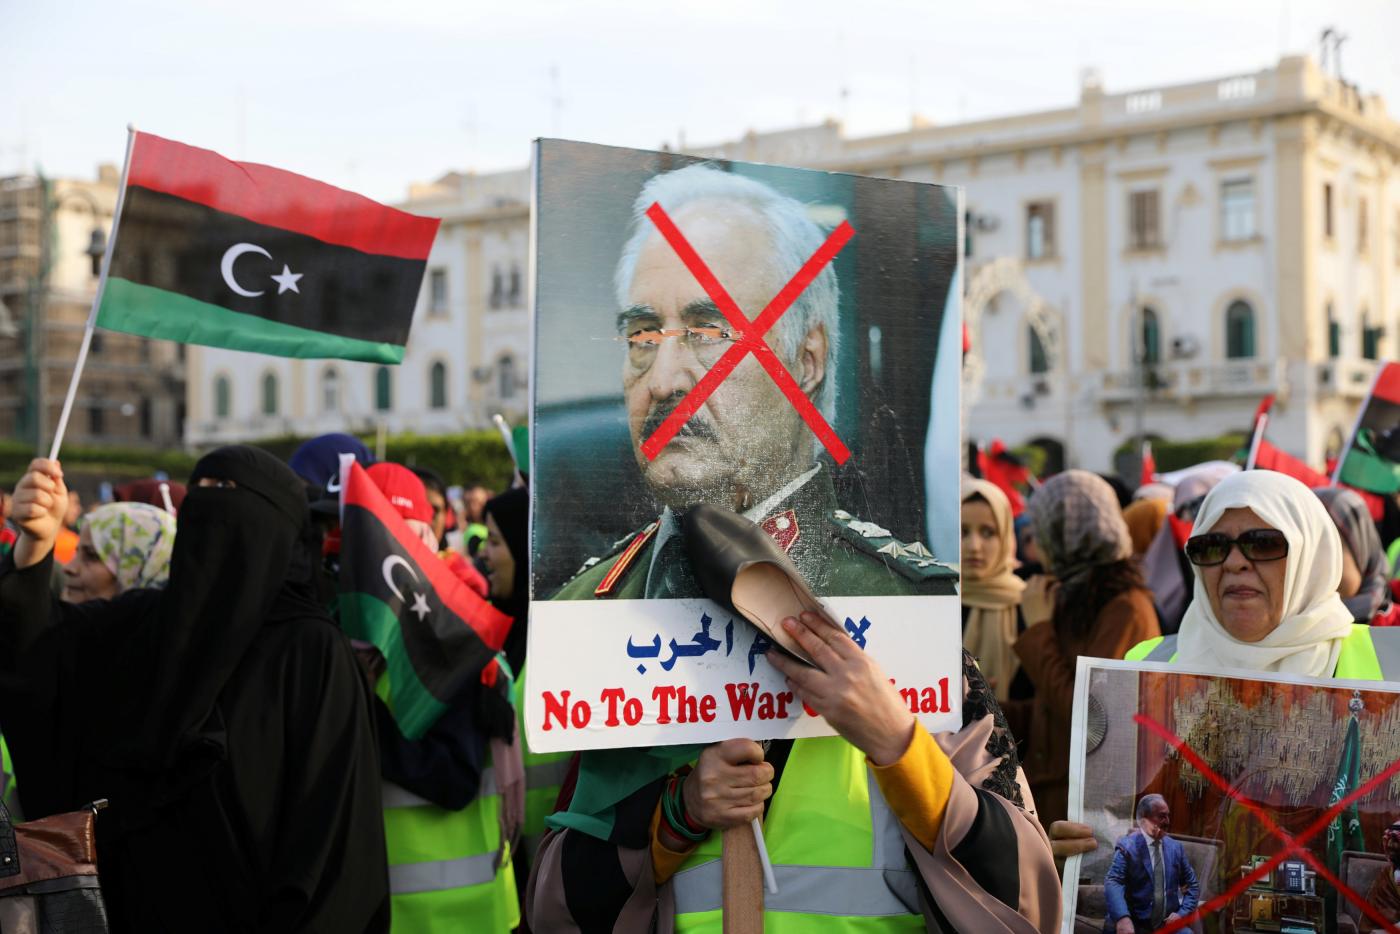 Libyans demand an end to Haftar’s attack in a protest in Tripoli (Reuters)